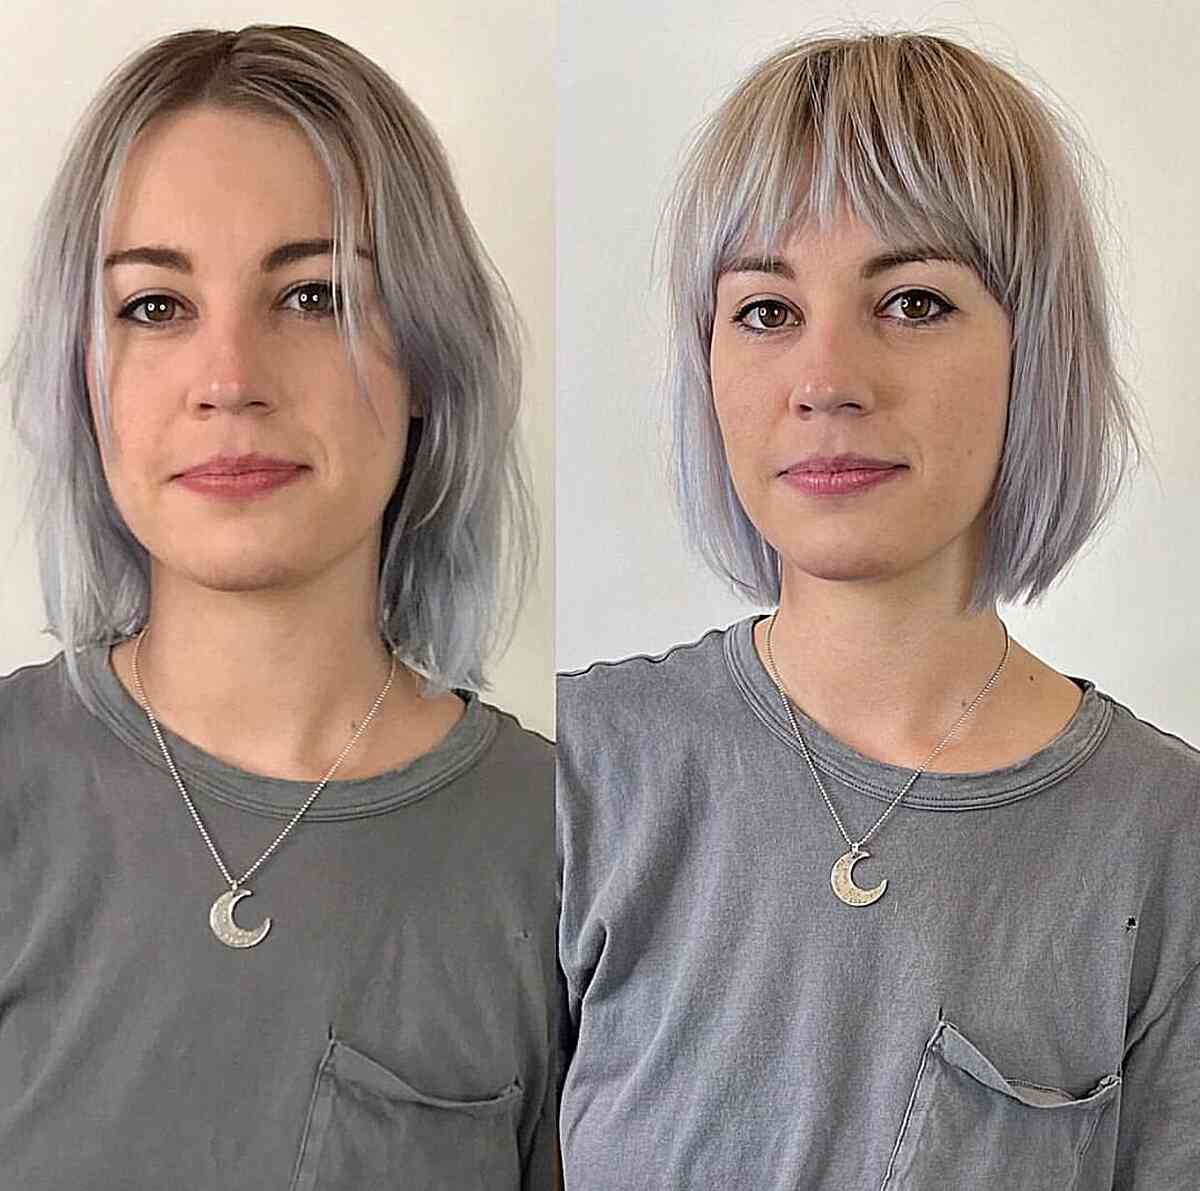 Smokey Grey Neck-Length Bob with bangs for ladies with oval faces